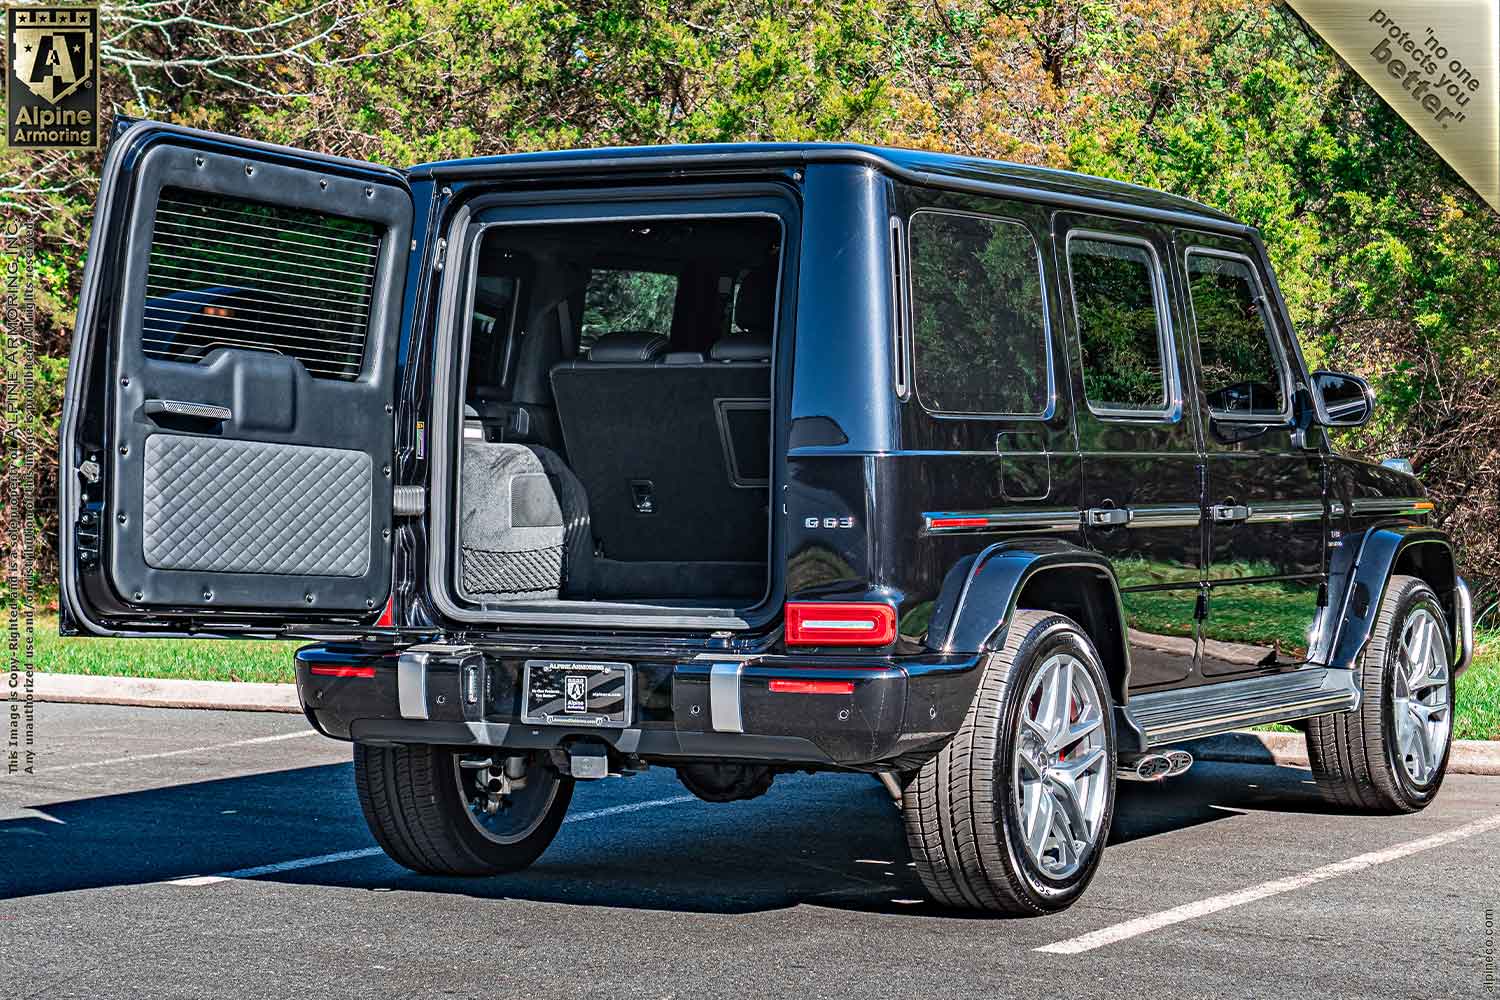 New Inventory armored Mercedes-Benz G63 Level A9/B6+  Exterior & Interior Images VIN:5038